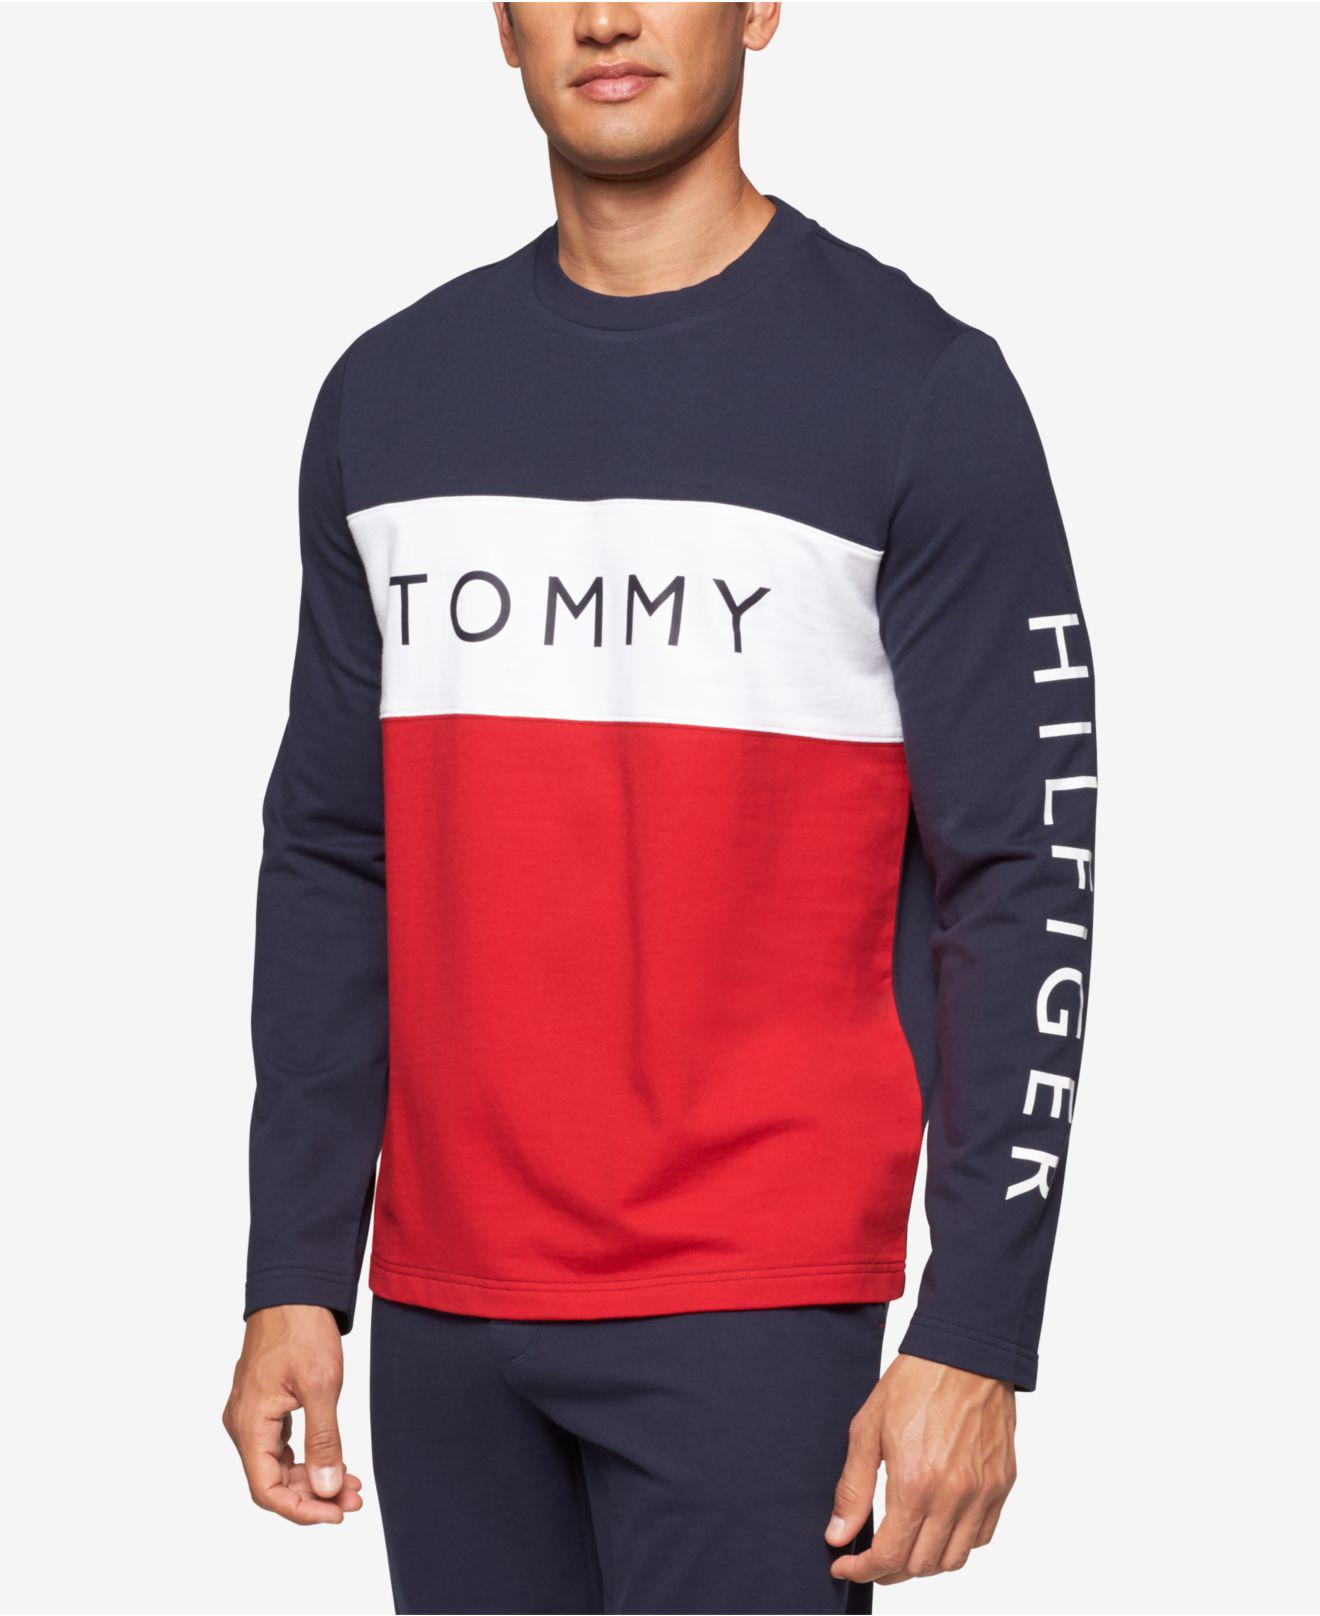 tommy hilfiger clothing india